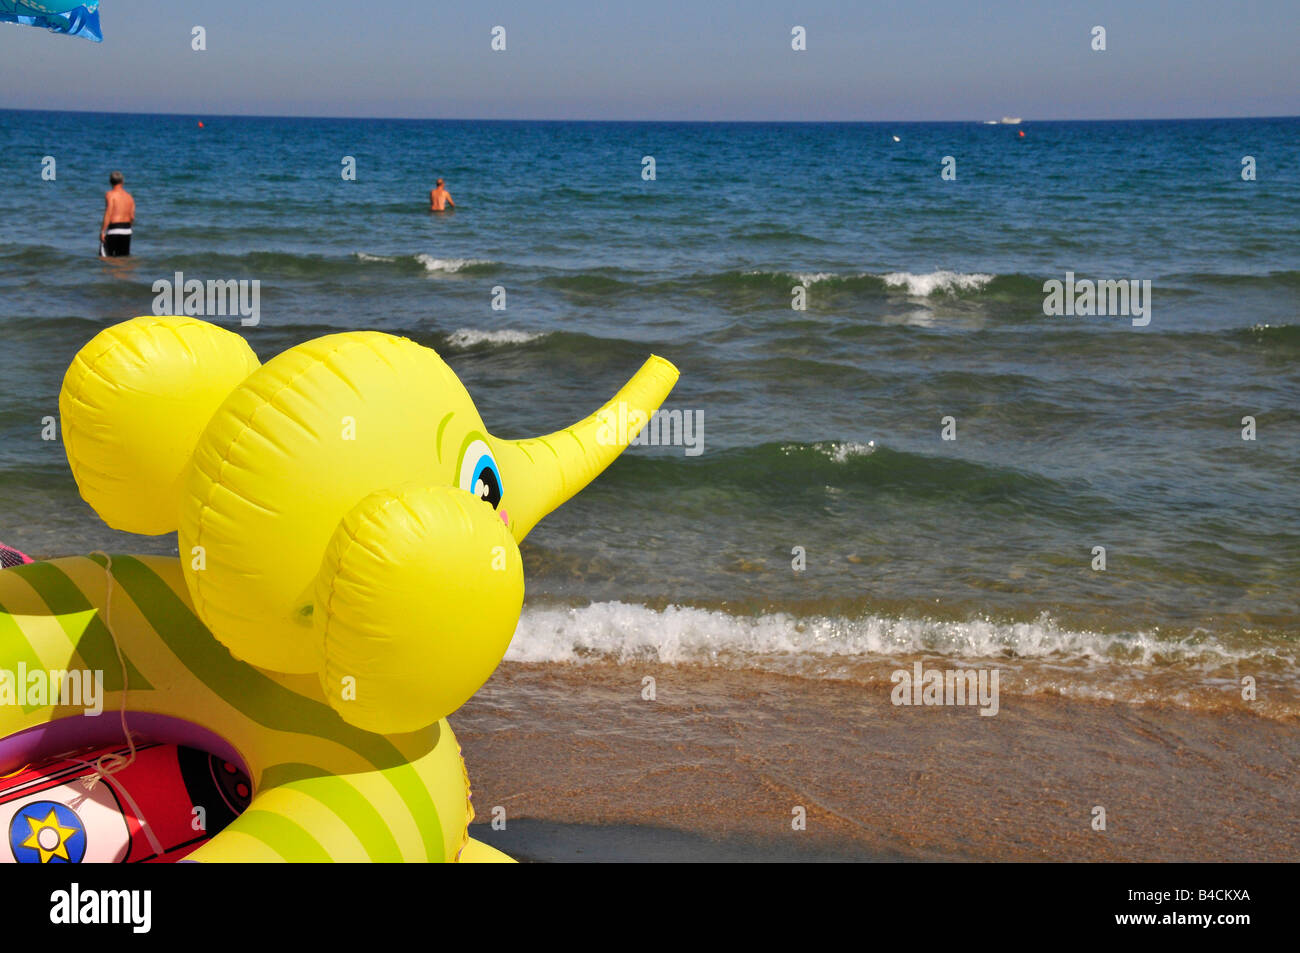 inflatable elephant toy by the sea Stock Photo